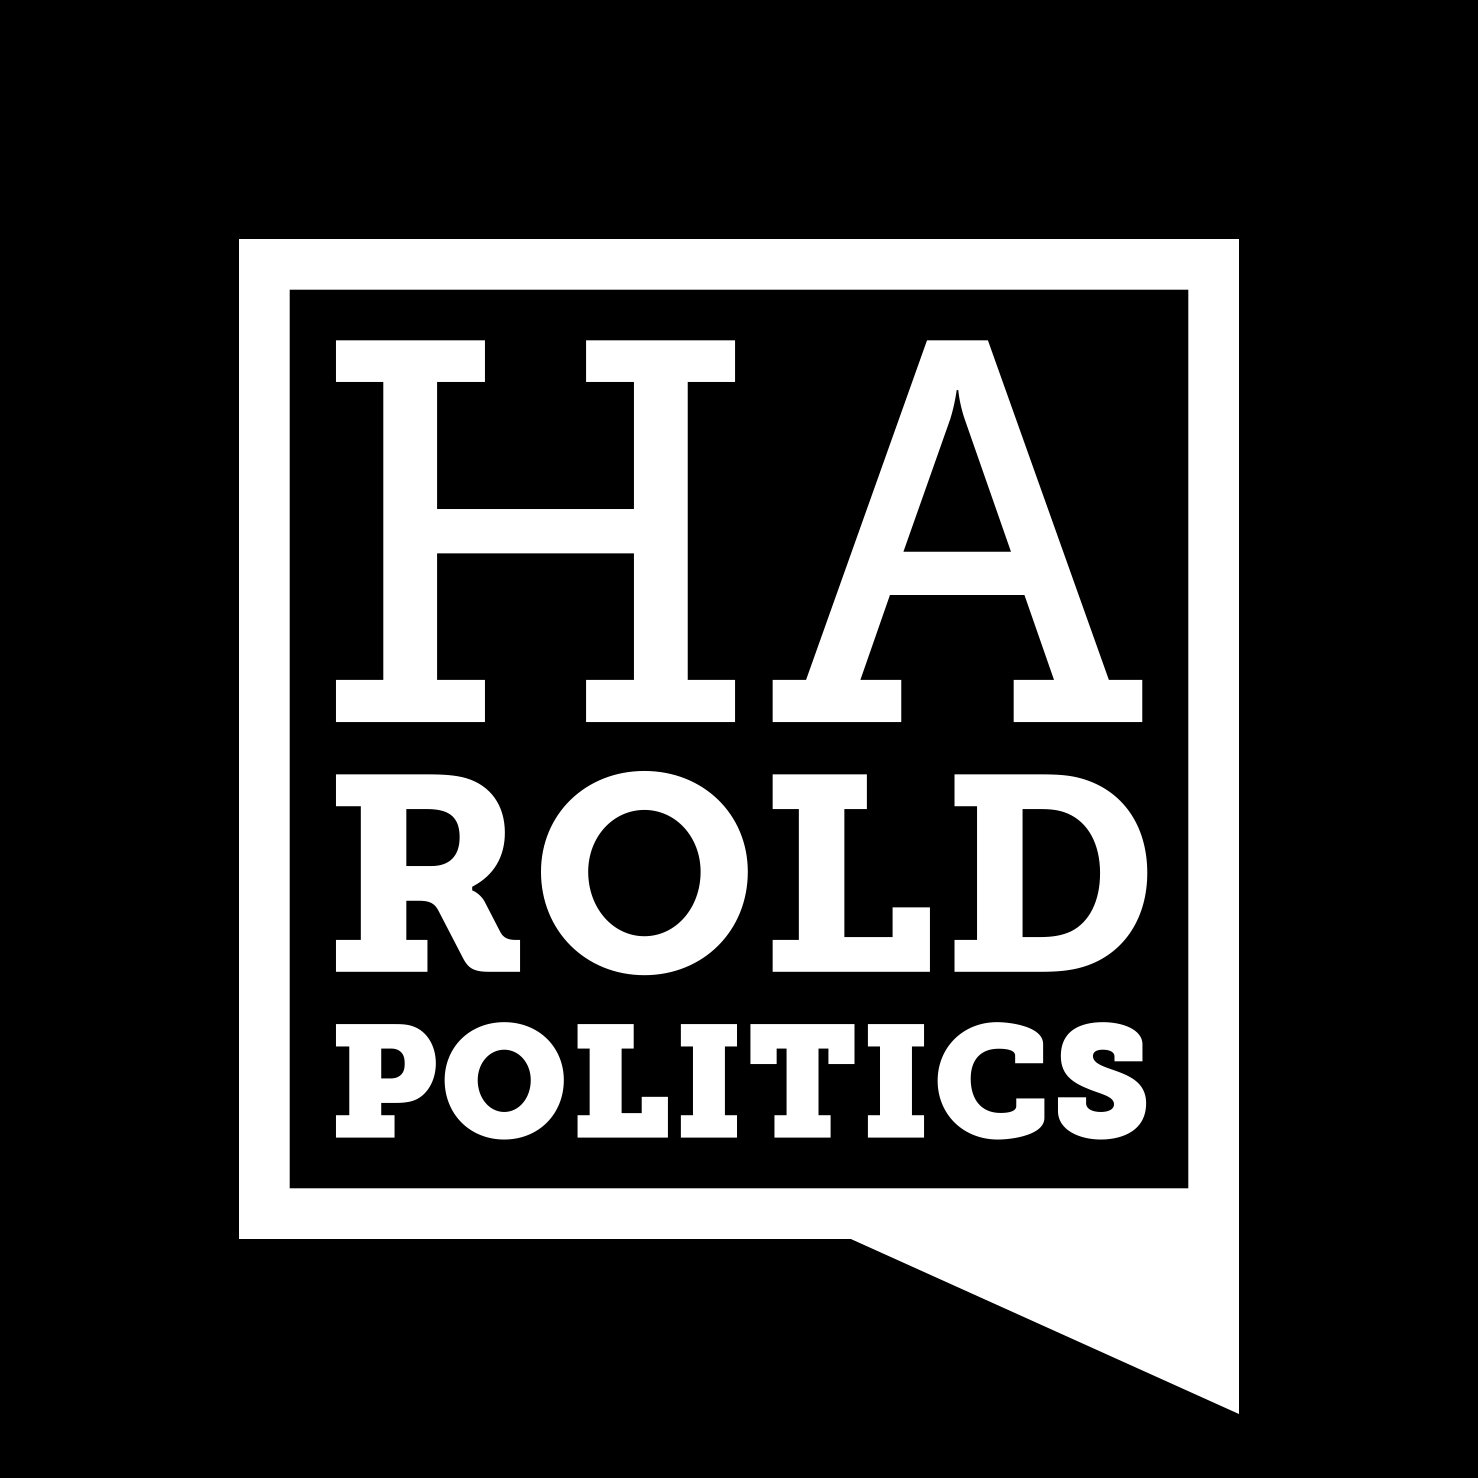 Faking it since 1980, Harold Politics serves soft facts and hot truths and holds no one accountable—because alternative facts are just funnier. Period.